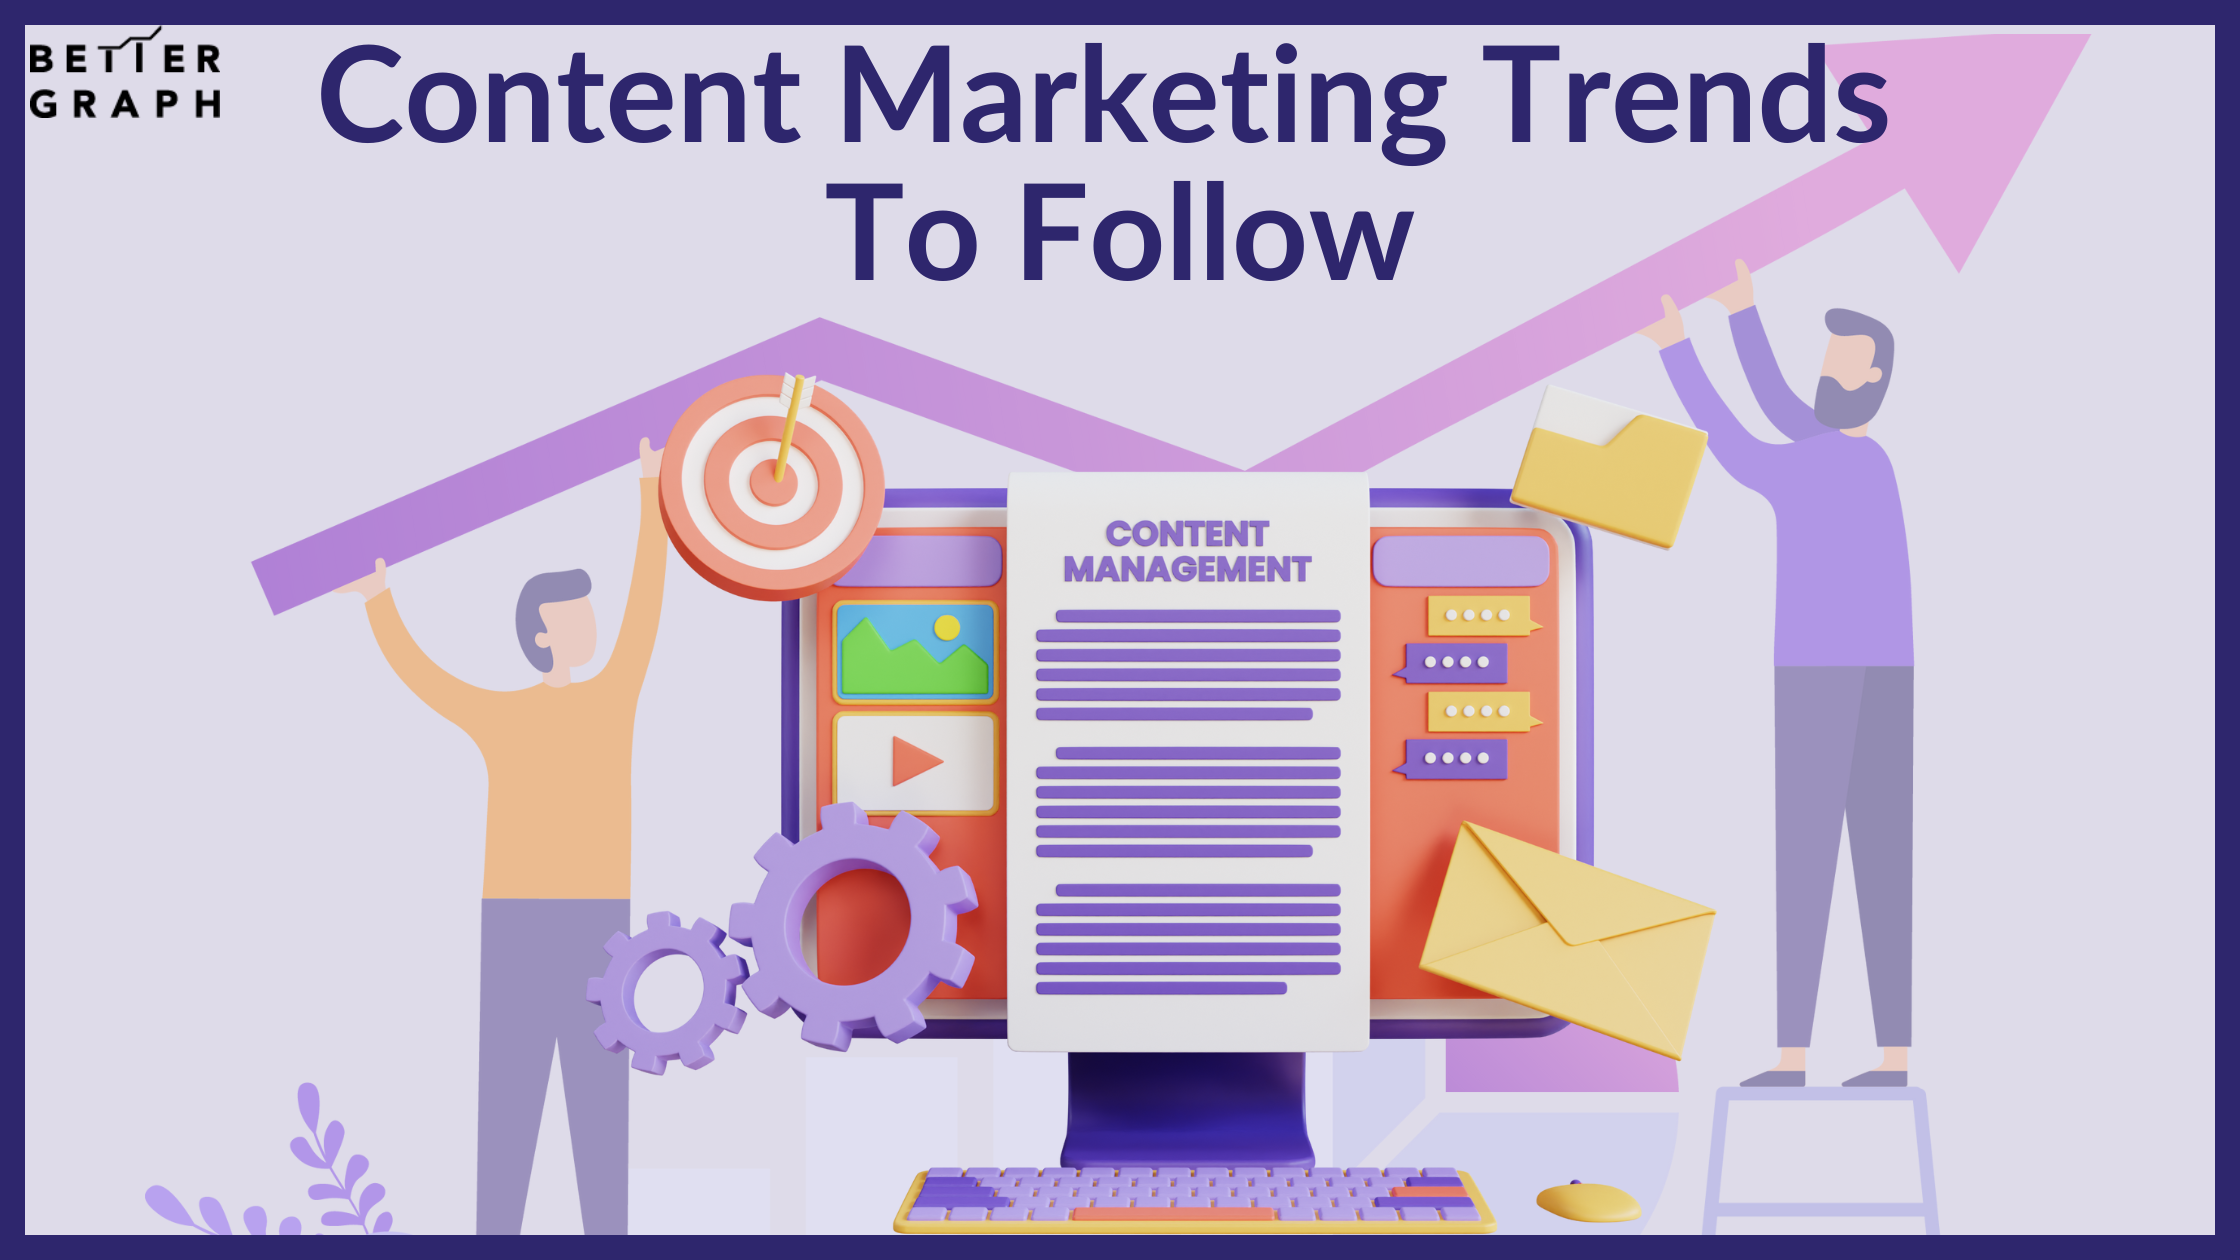 Content Marketing Trends To Follow (1).png  by BetterGraph